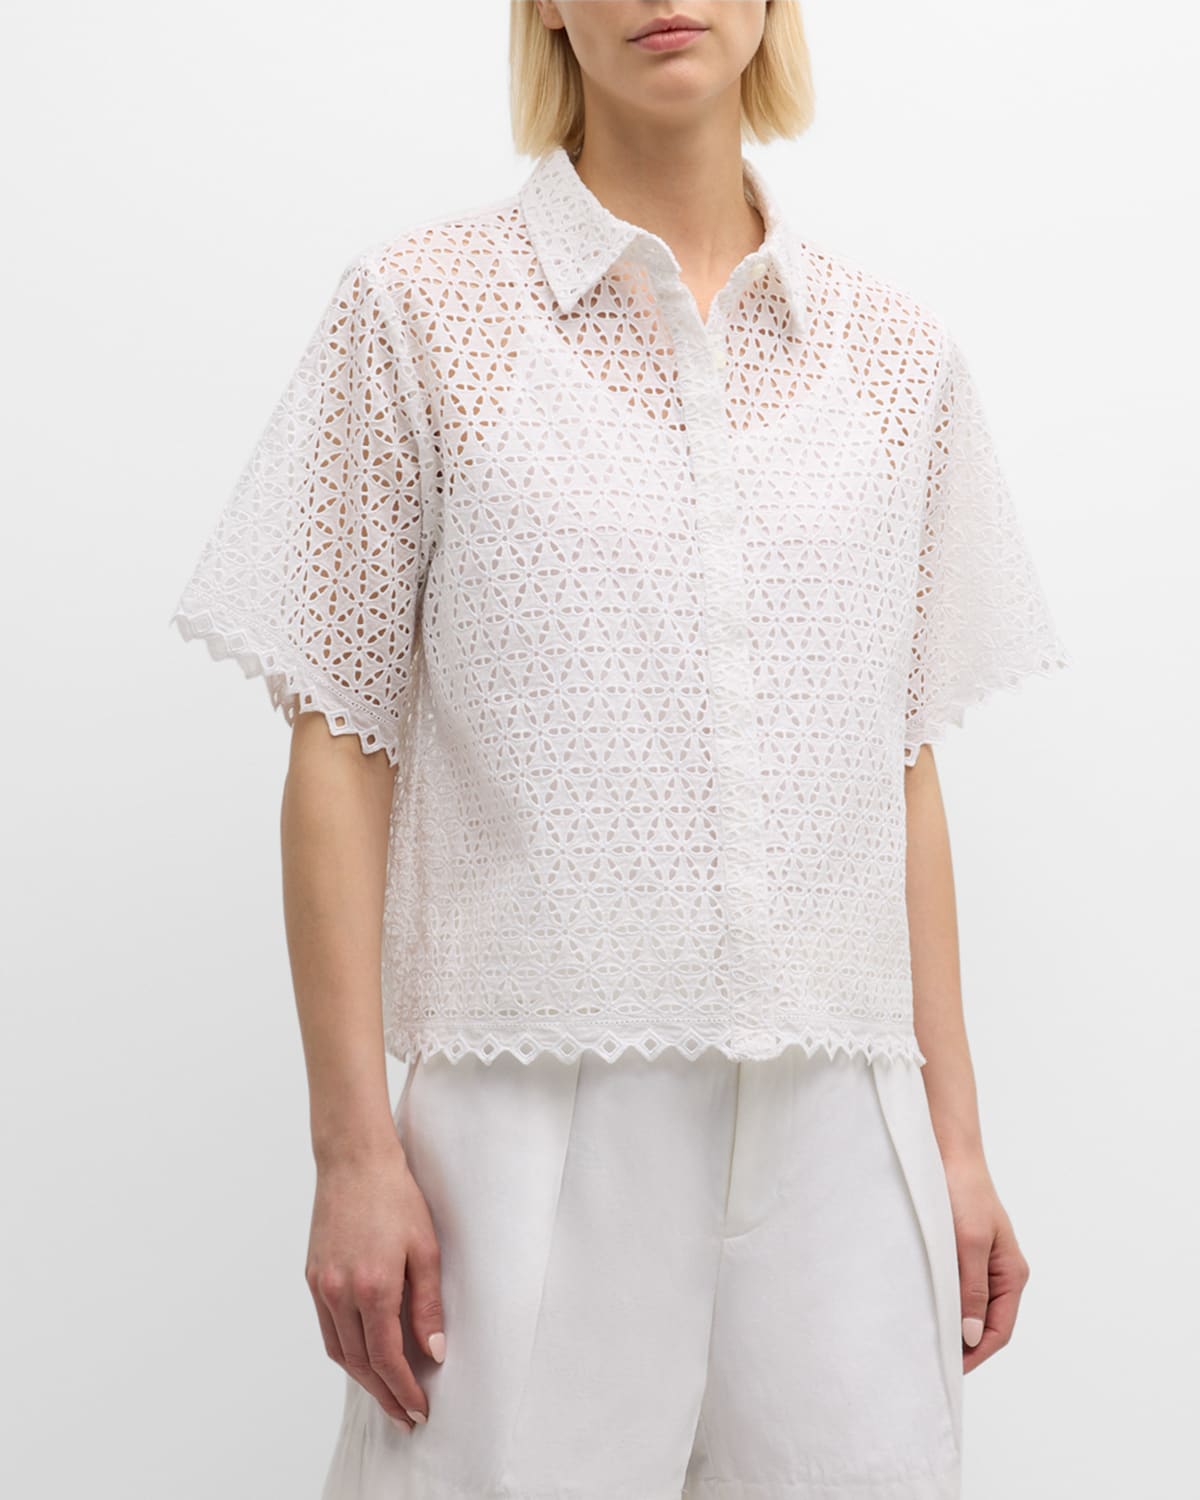 Perle Boxy Floral Eyelet-Embroidered Top